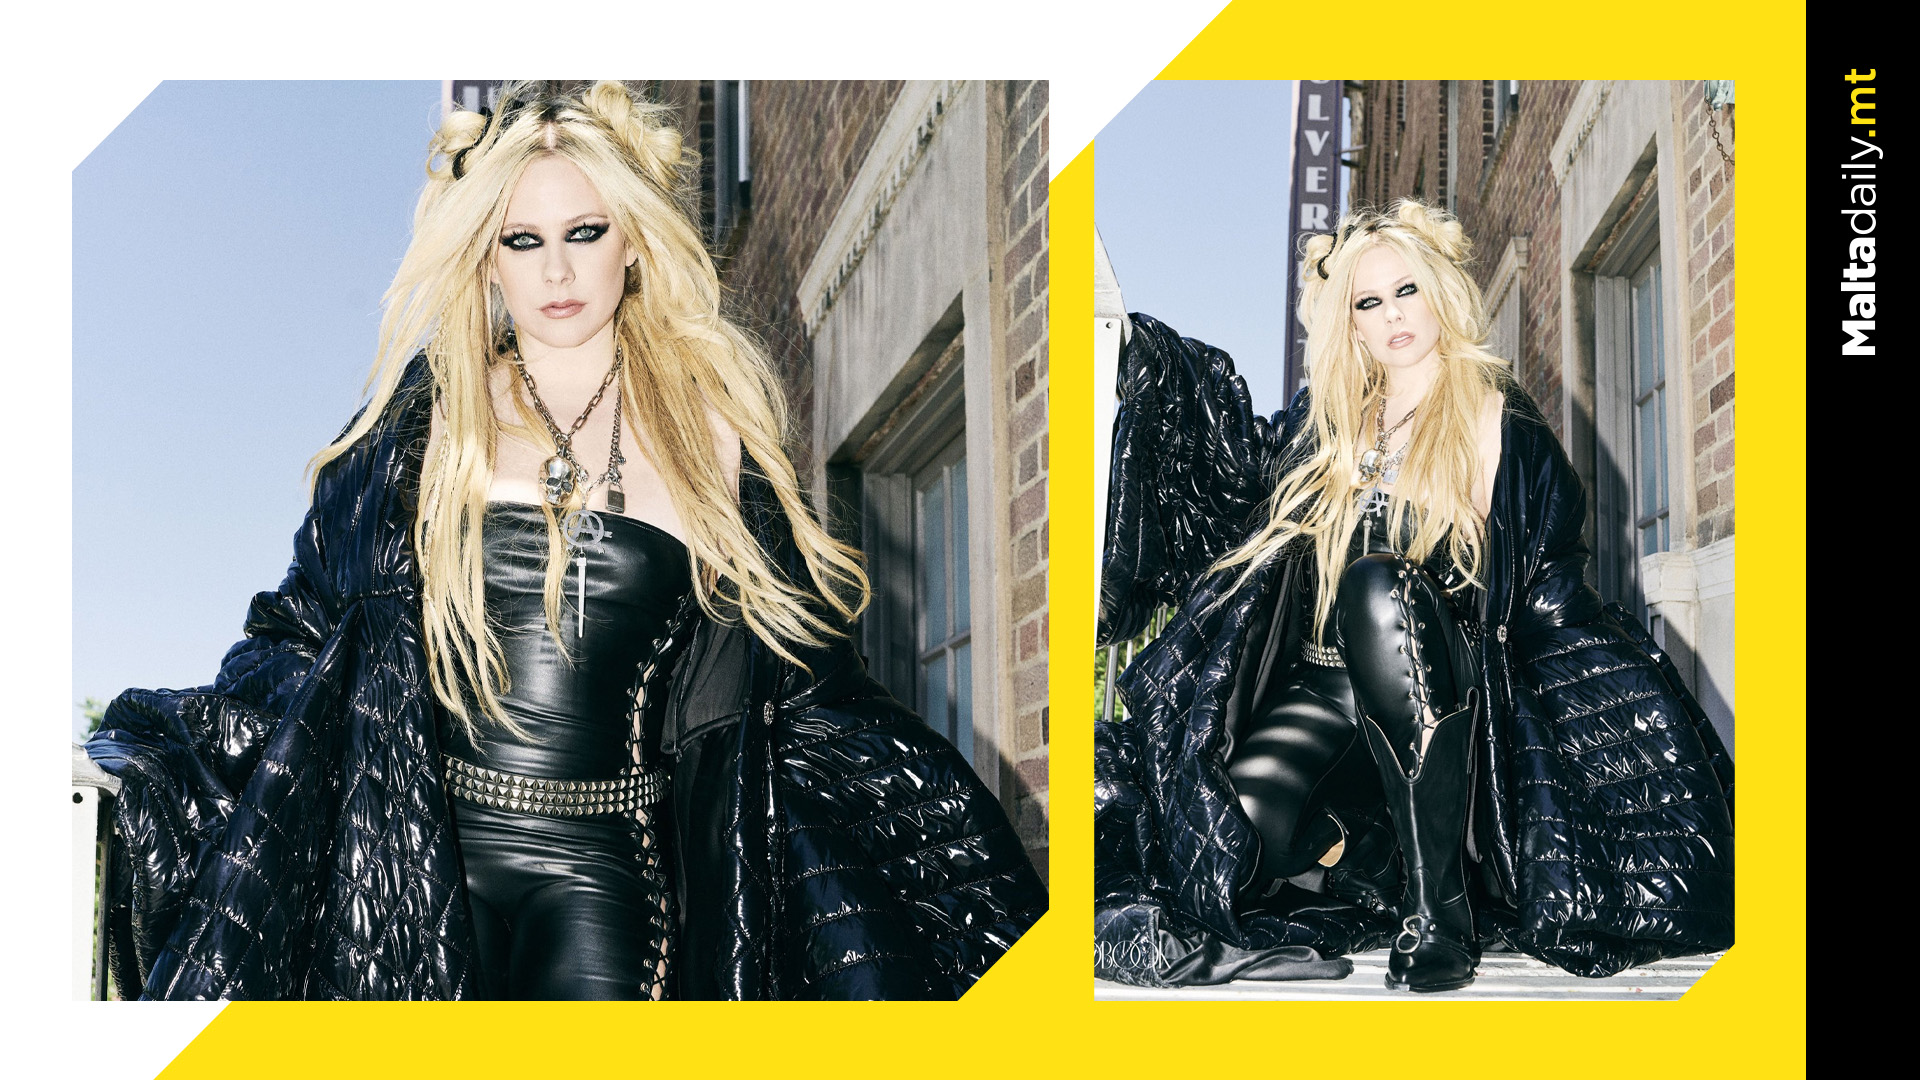 Pop Punk Icon Avril Lavigne Wears Charles & Ron for Recent Magazine Shoot